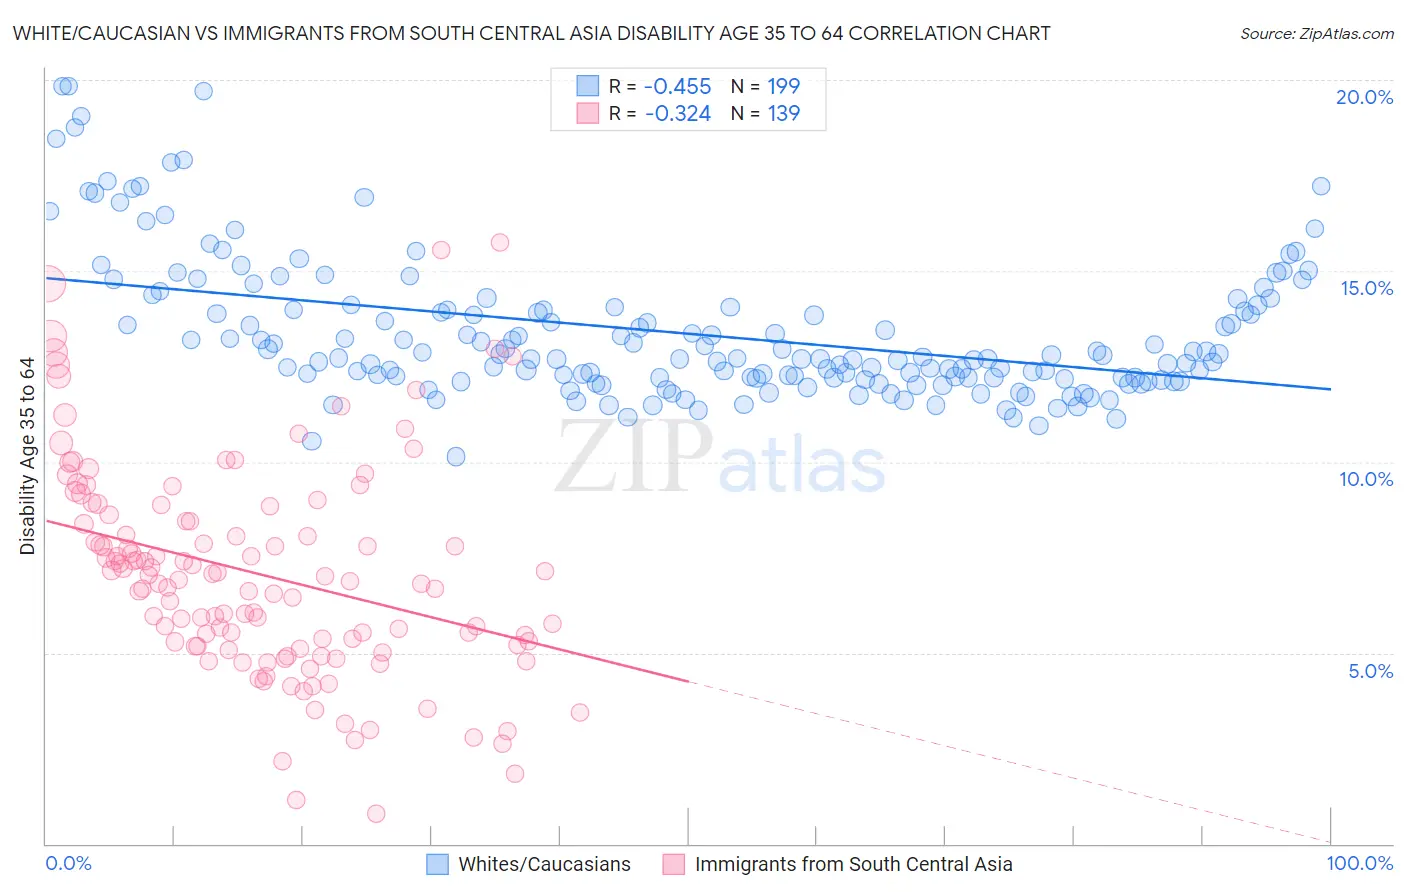 White/Caucasian vs Immigrants from South Central Asia Disability Age 35 to 64